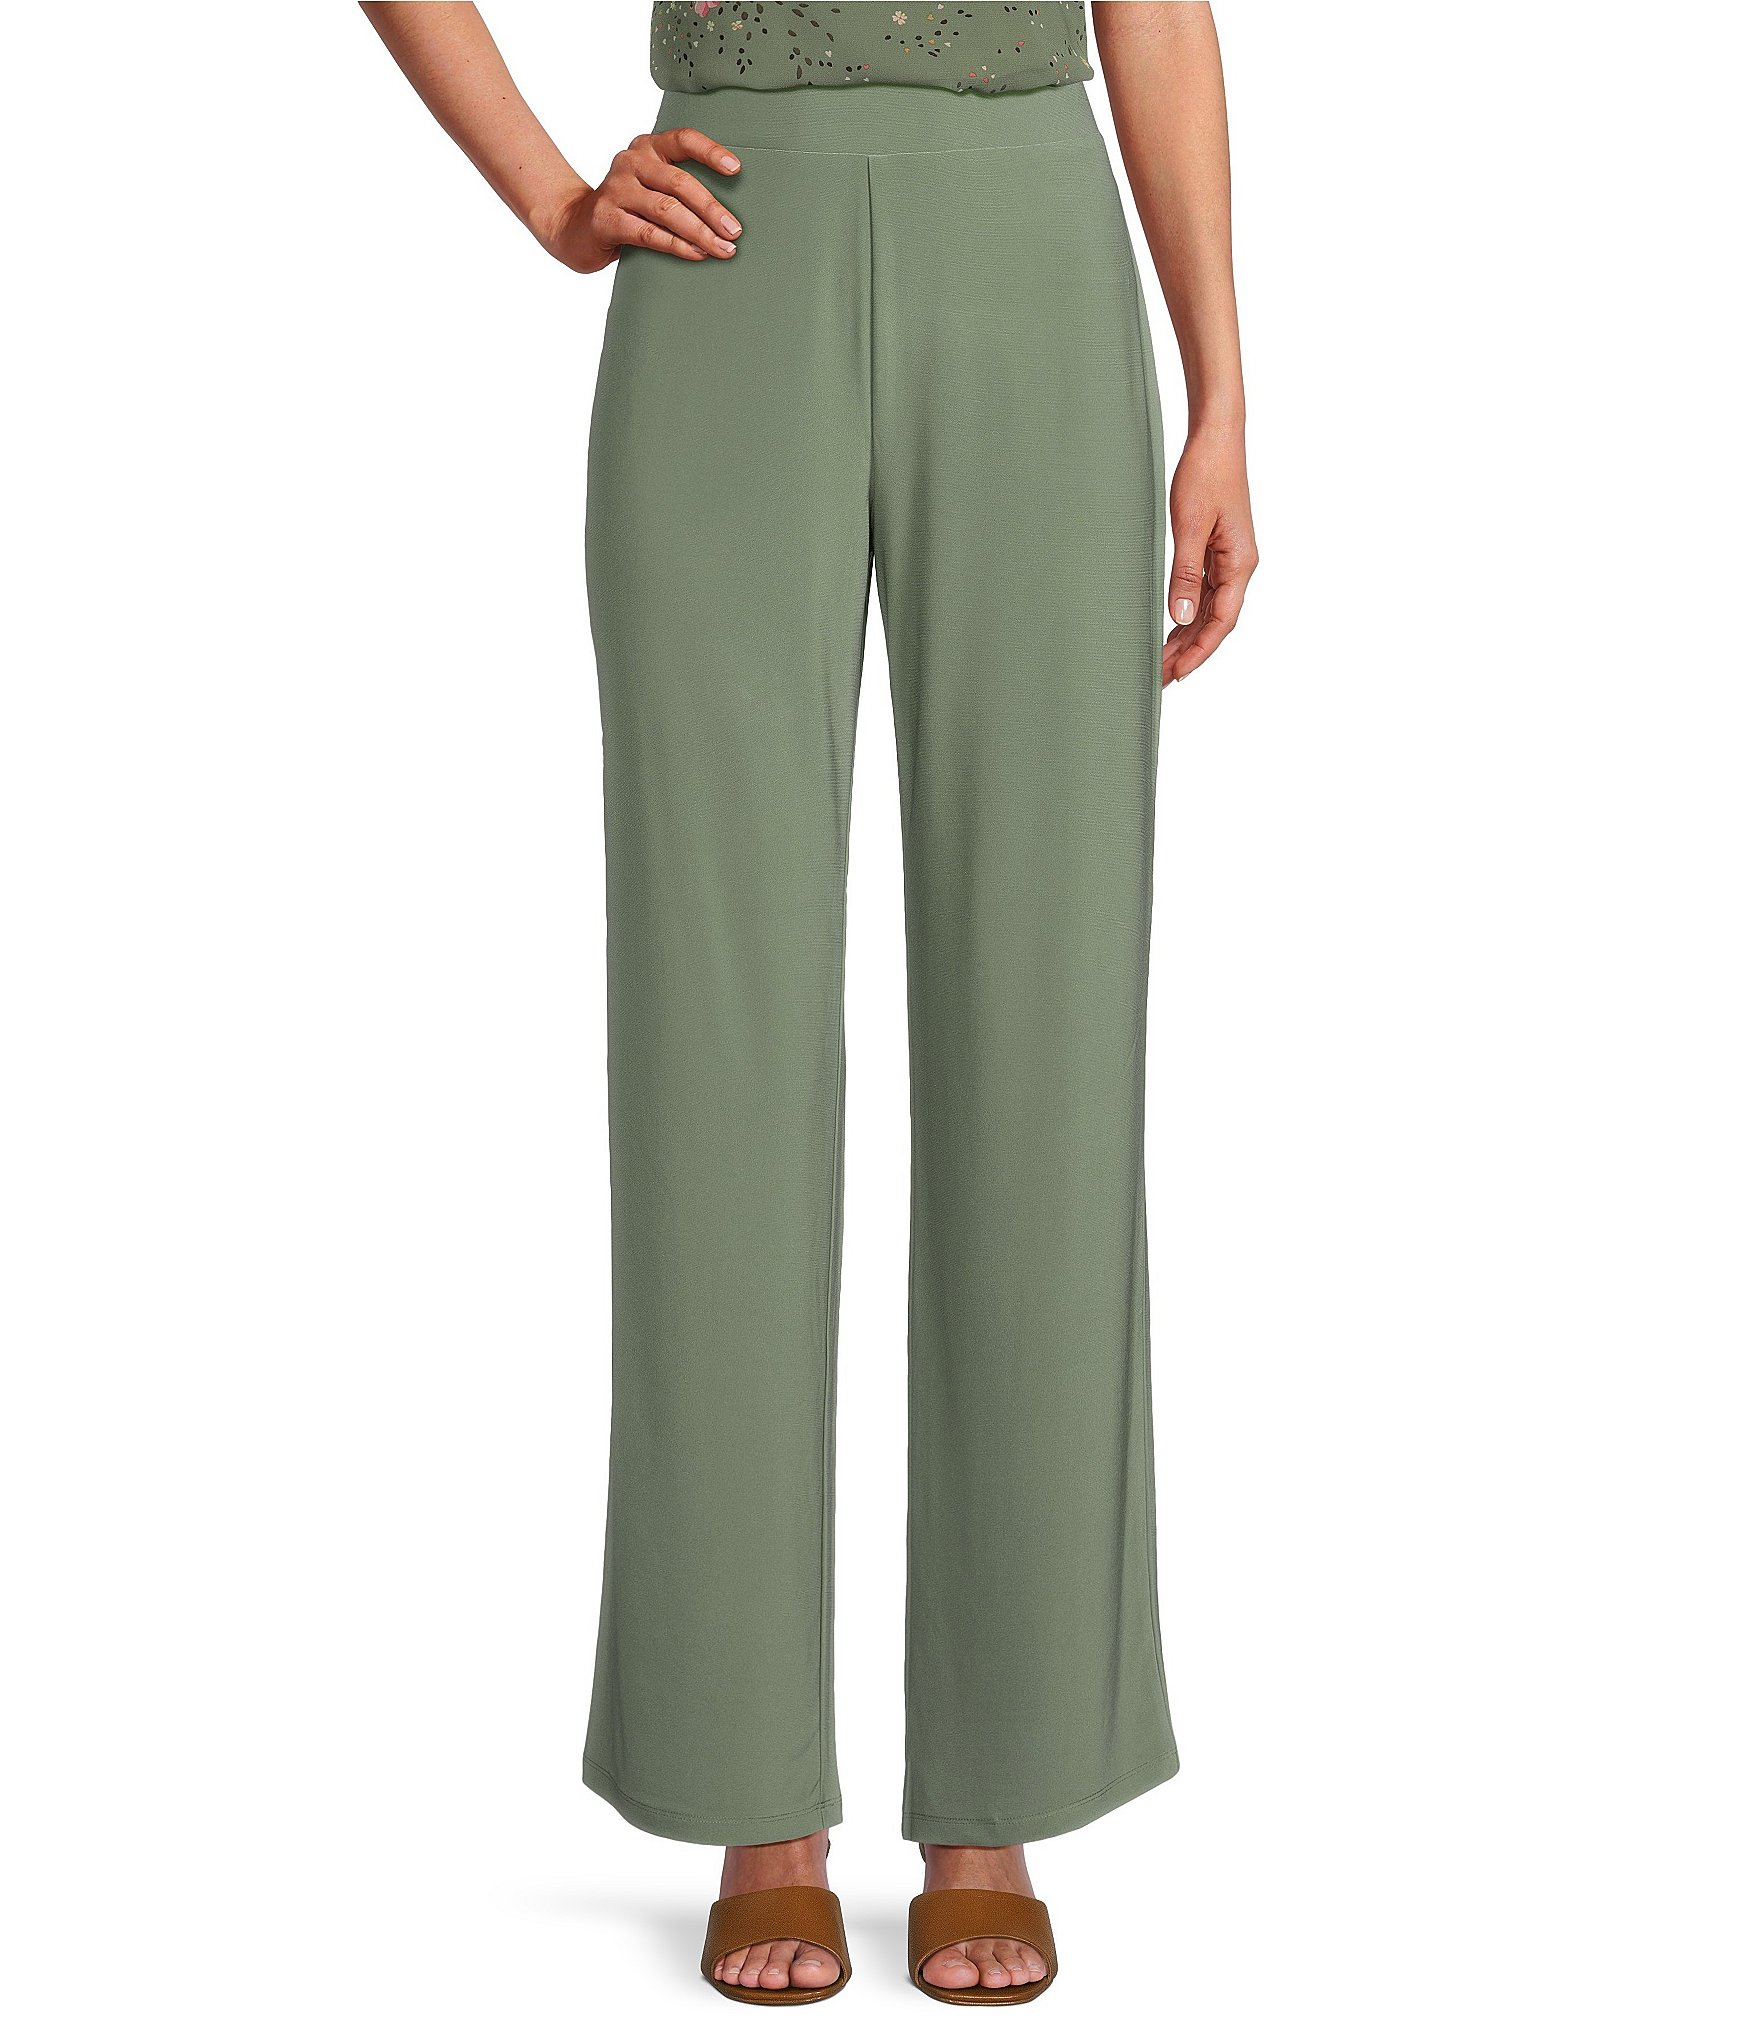 COLSIE GREEN ELASTIC & TIE WAIST WITH SLITS ON BOTTOM LEGS SWEATPANTS SIZE  XS - $12 - From Style